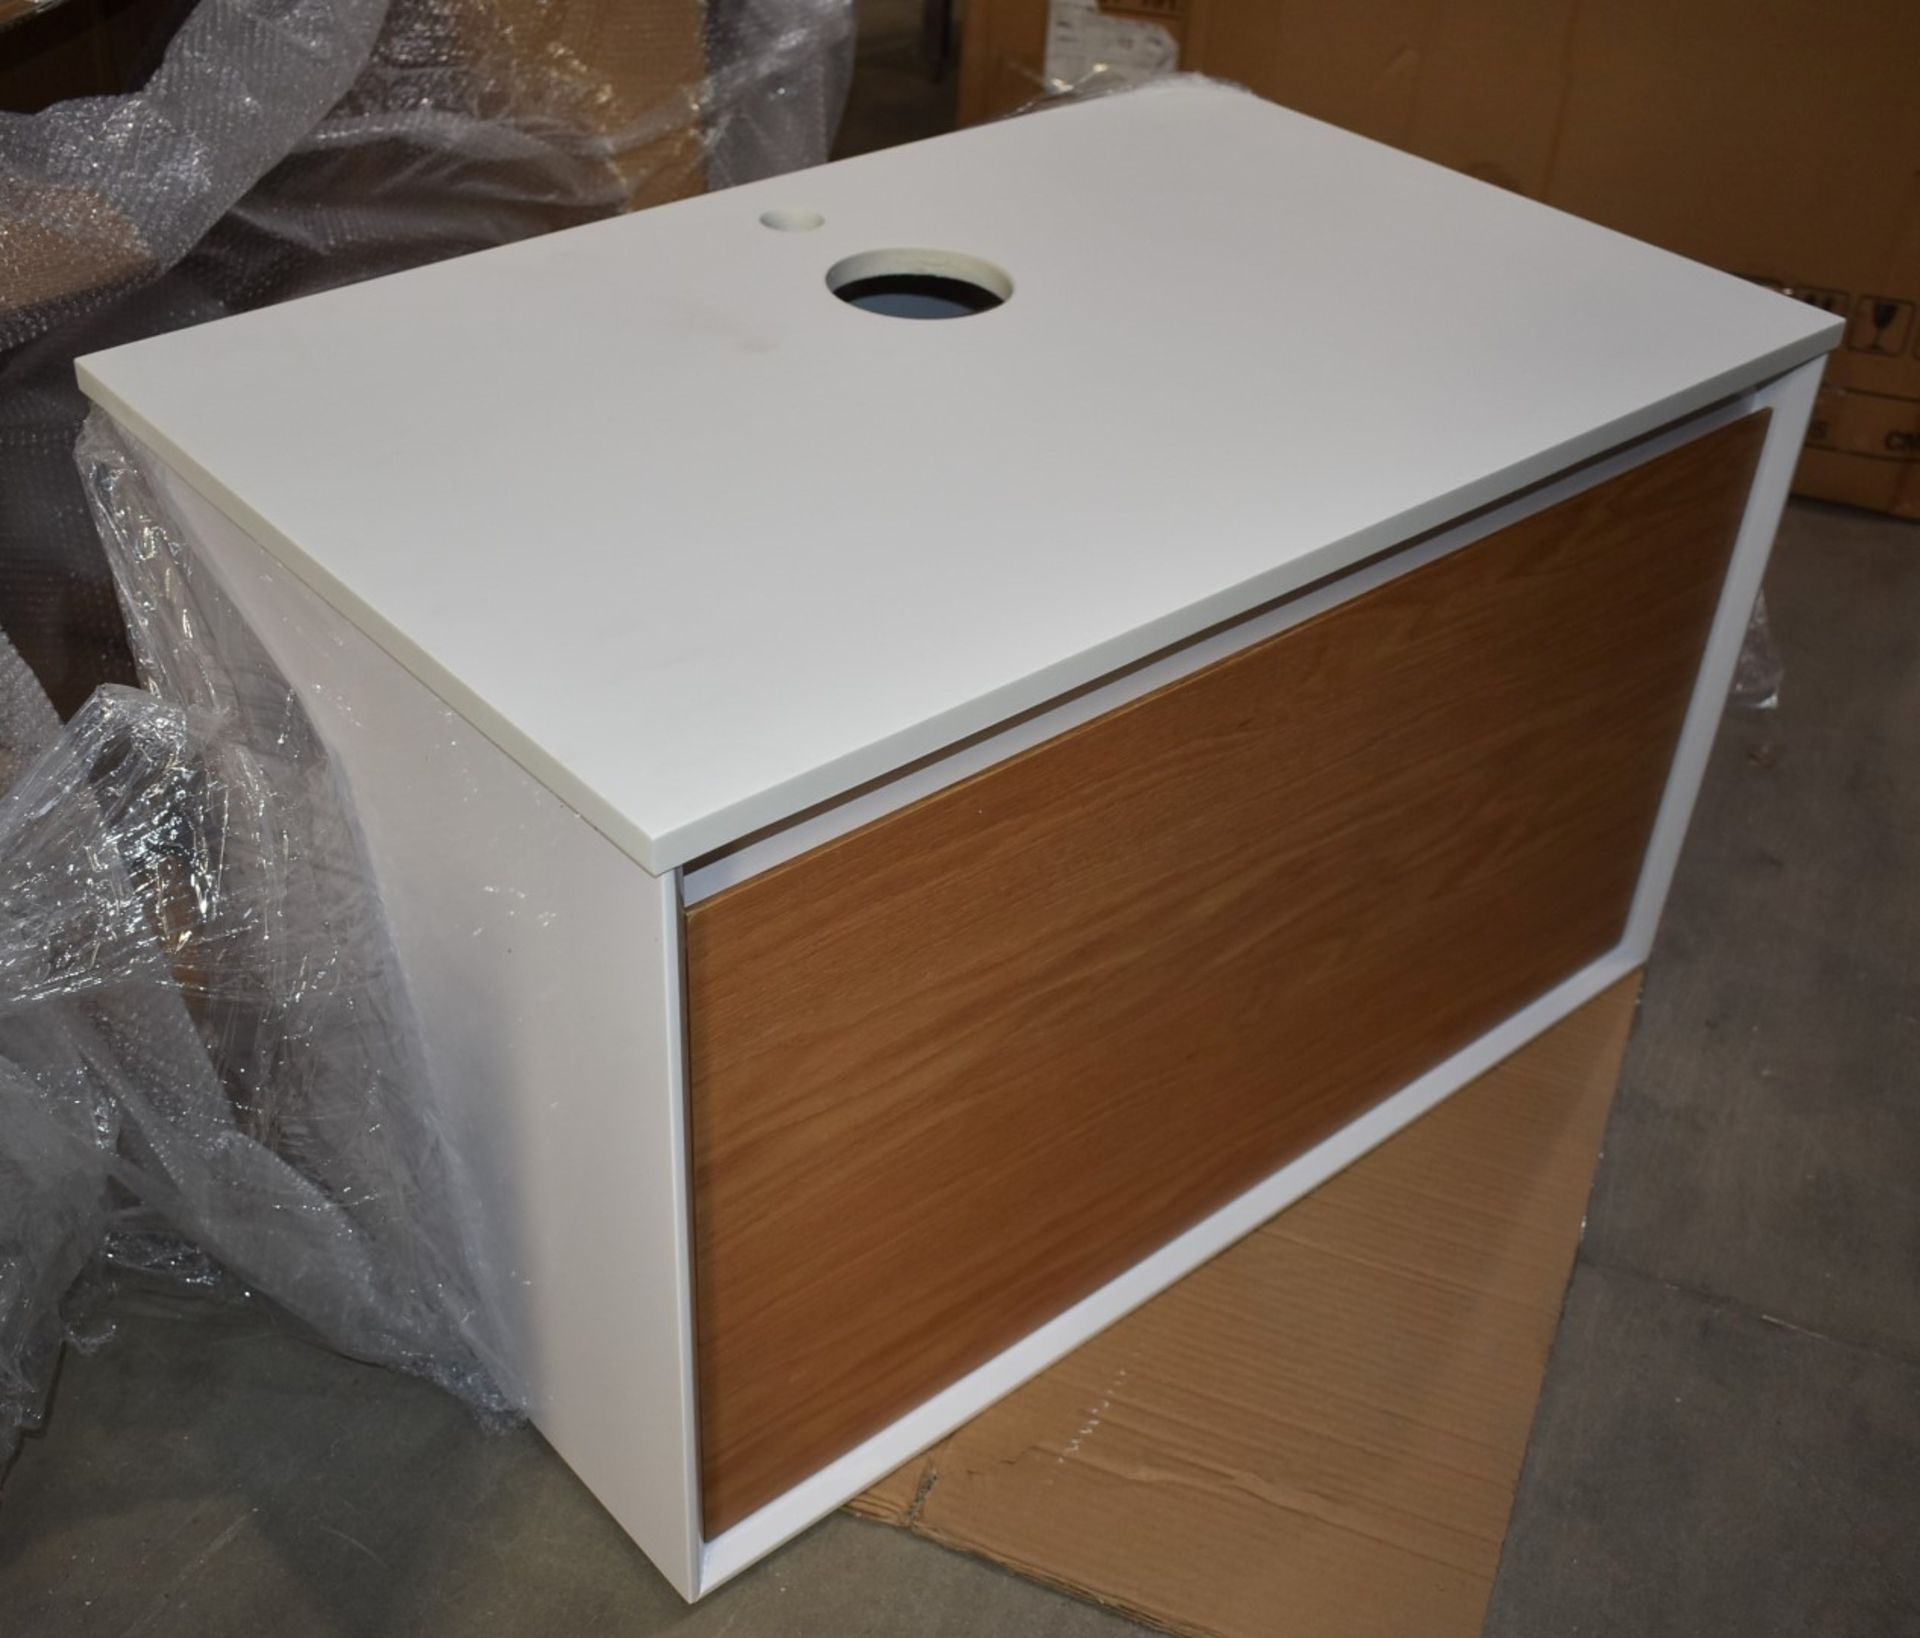 1 x Minko Contemporary Wall Mounted Vanity Unit With Wash Basin - White Gloss and Oak Finish With - Image 3 of 6